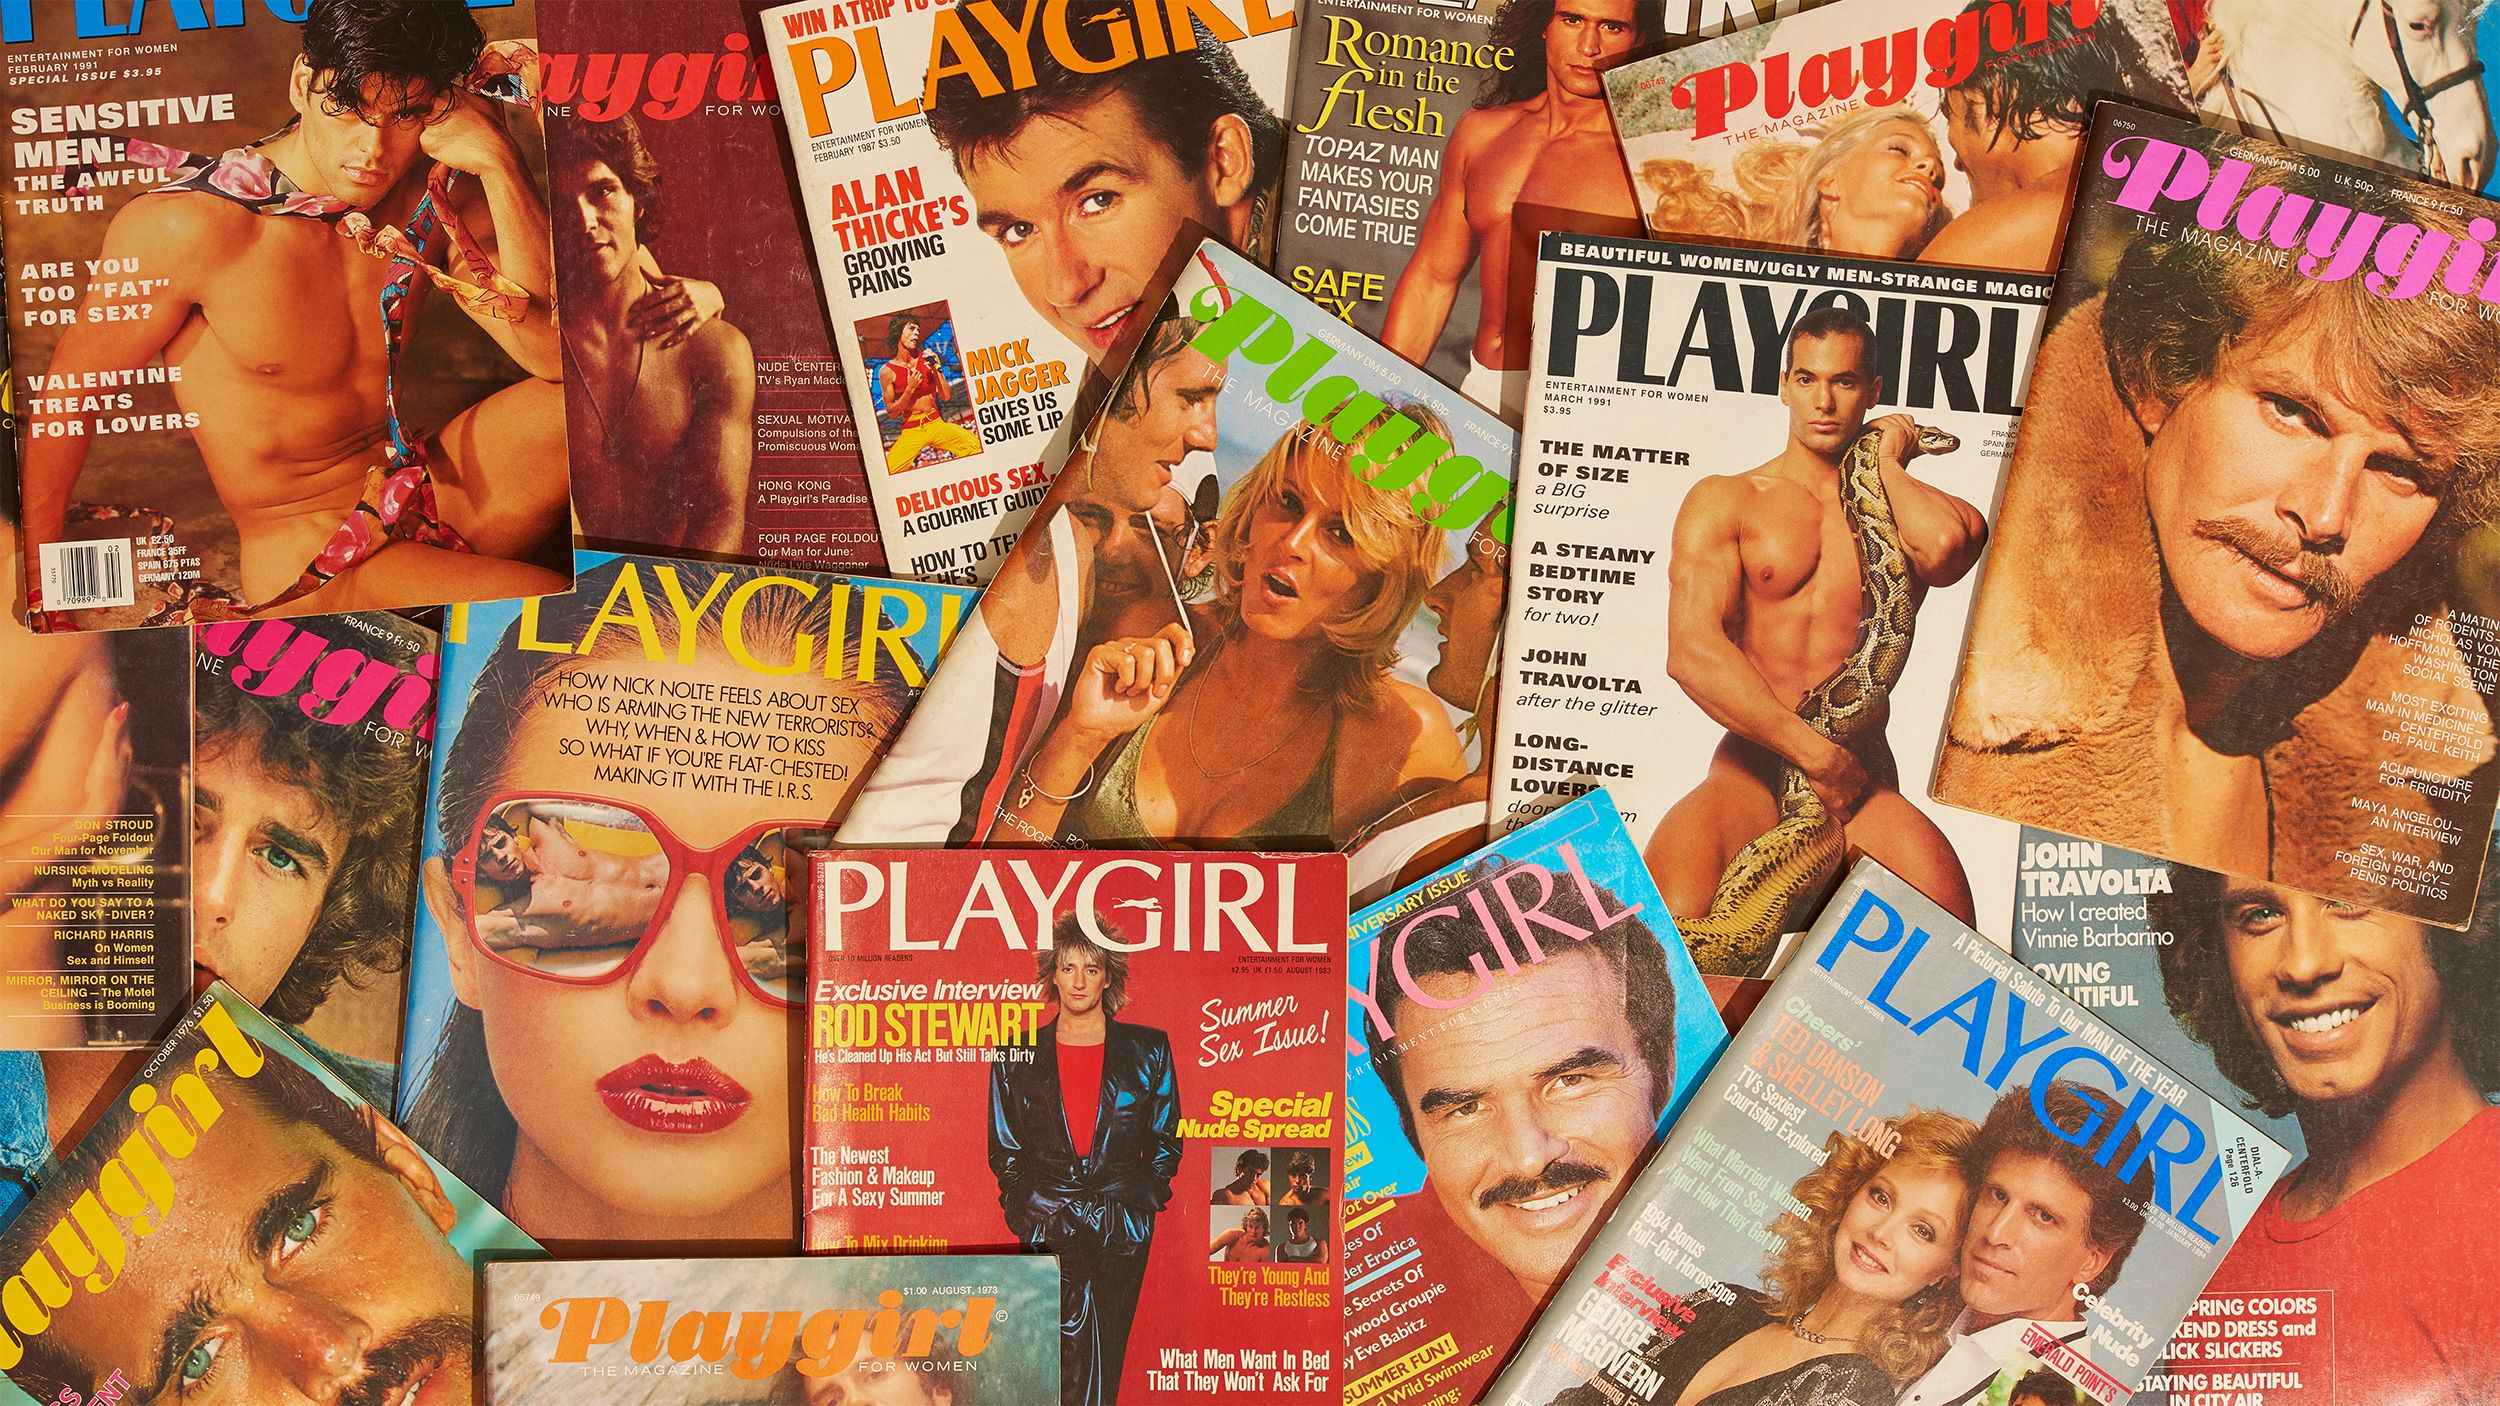 70s Porn Magazines Mother Daughter - History of Playgirl Magazine - How Playgirl Normalized Male Nudity